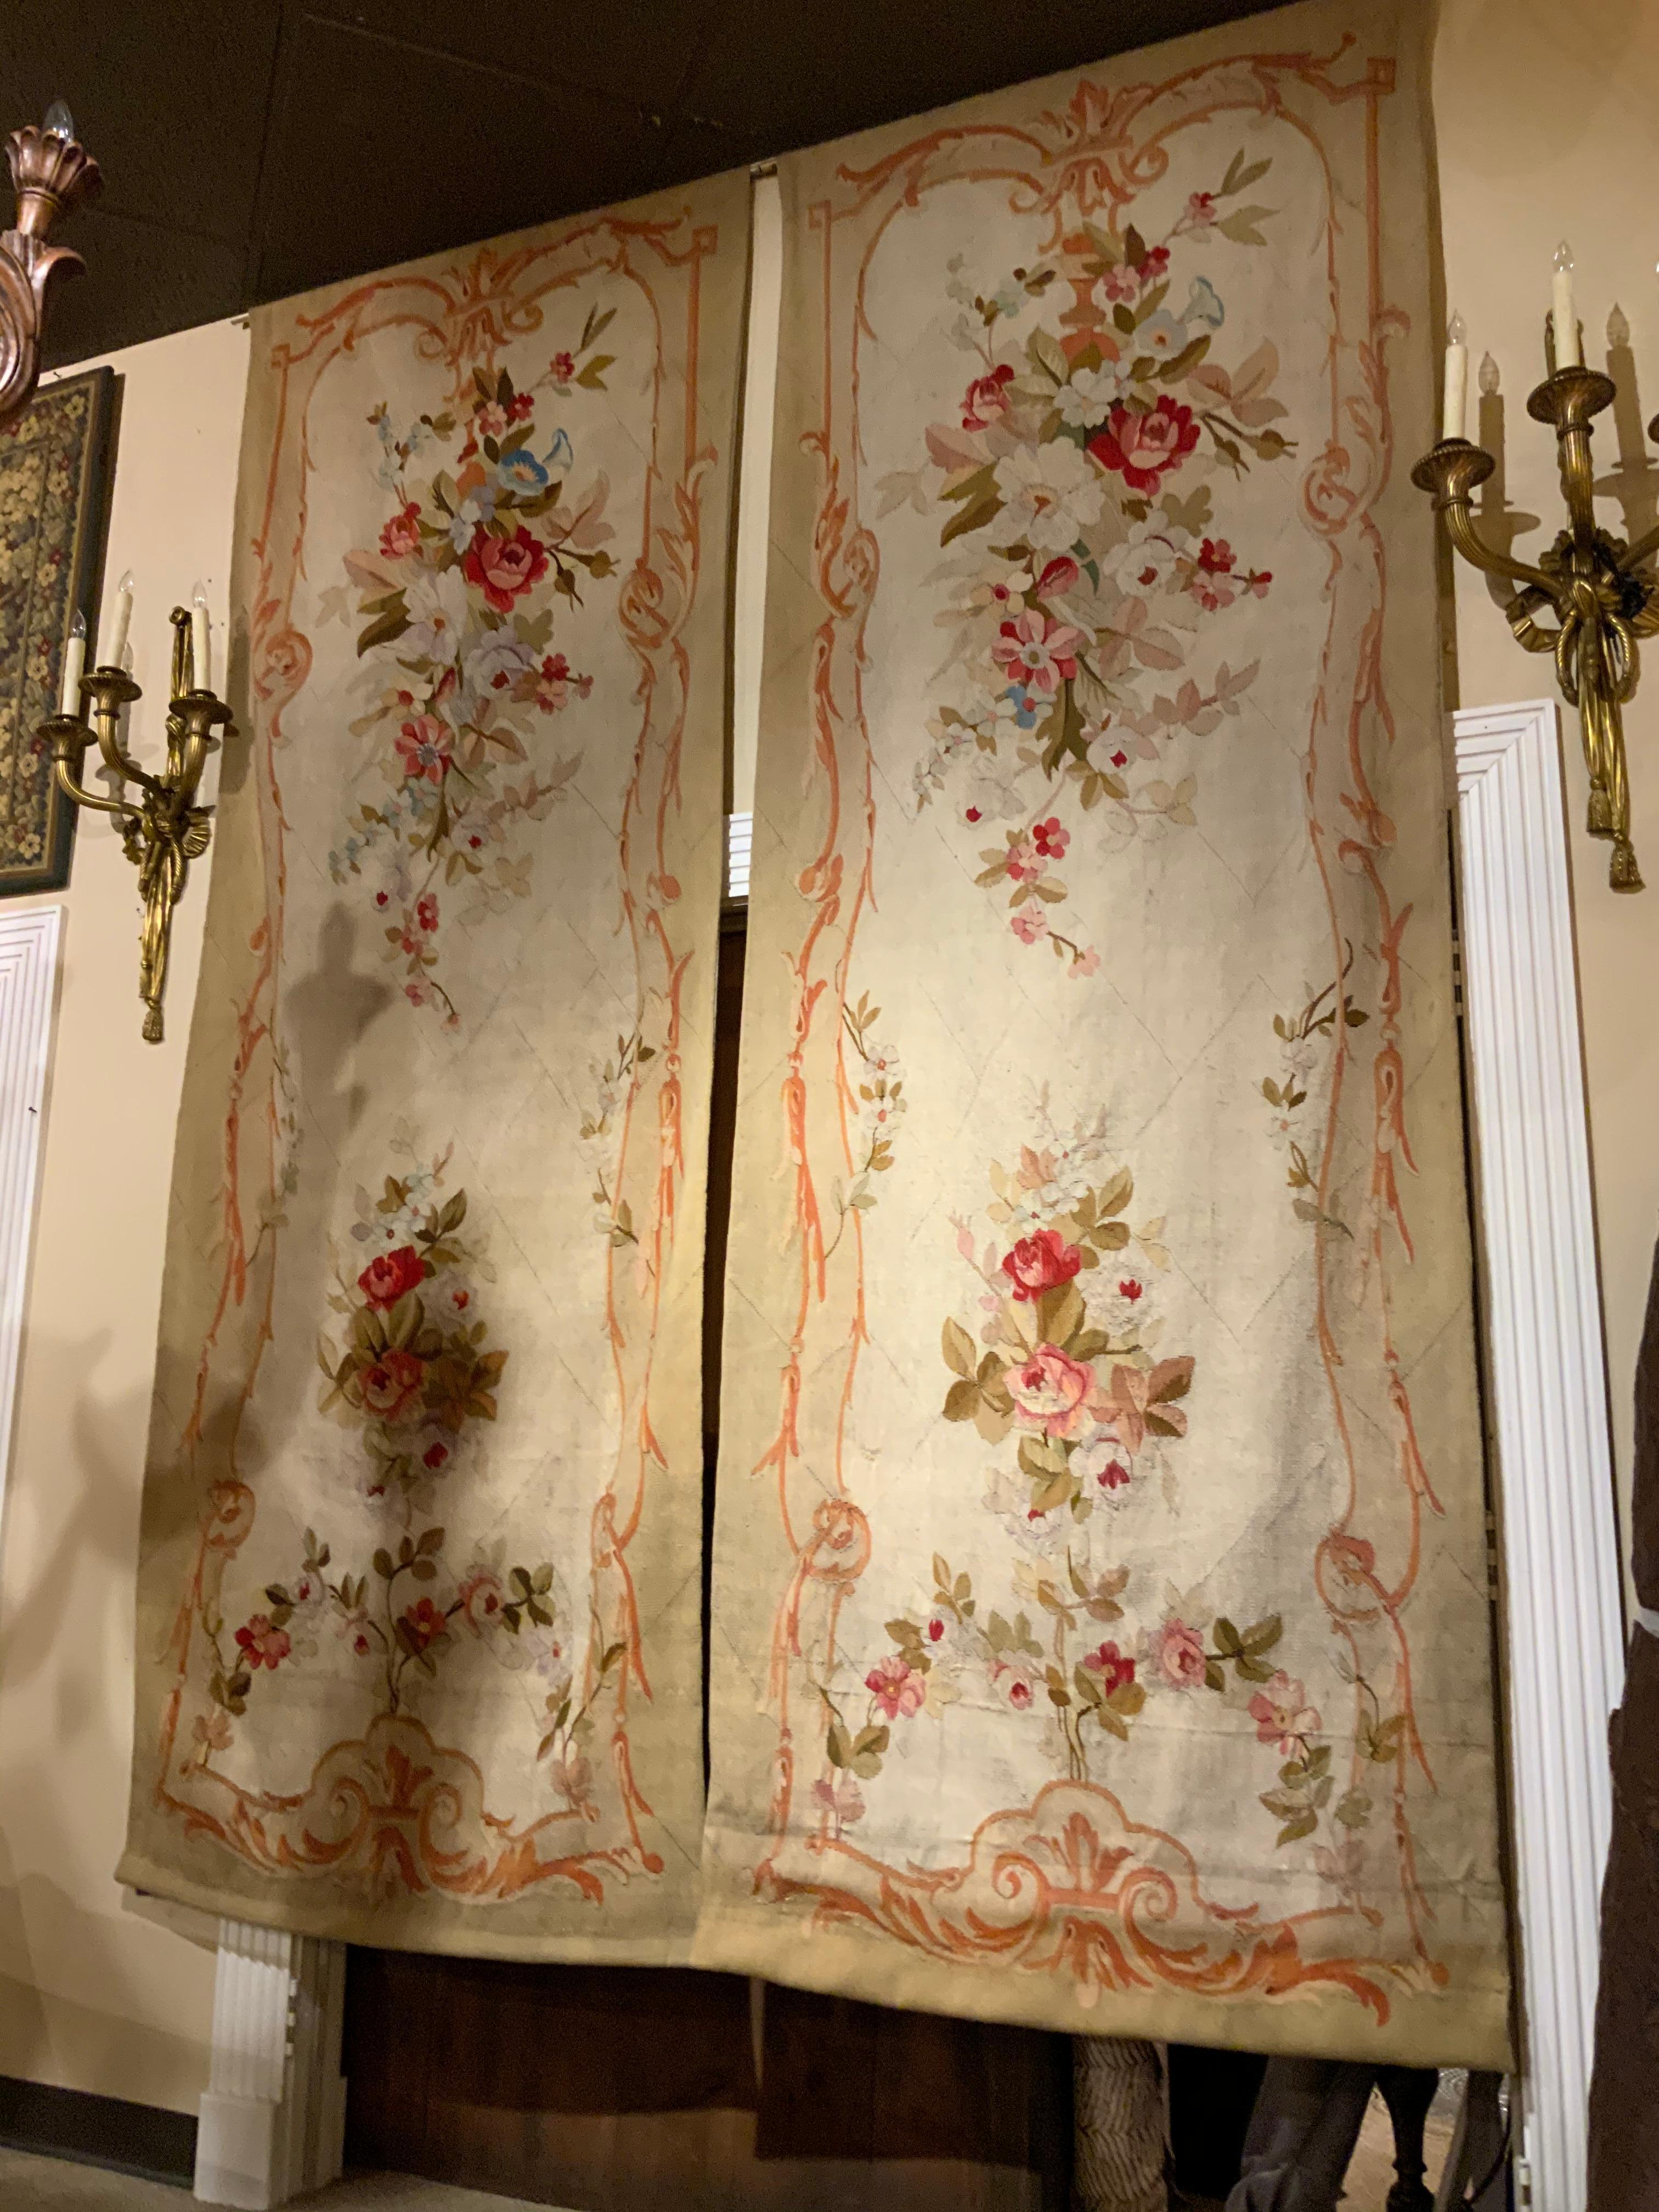 The name Aubusson is synonymous with finely created tapestries from
France. This pair is exceptional because they are elegant and very tall
Aubusson tapestries are prized for their timeless qualities: warmth
texture, artistic appeal and history.